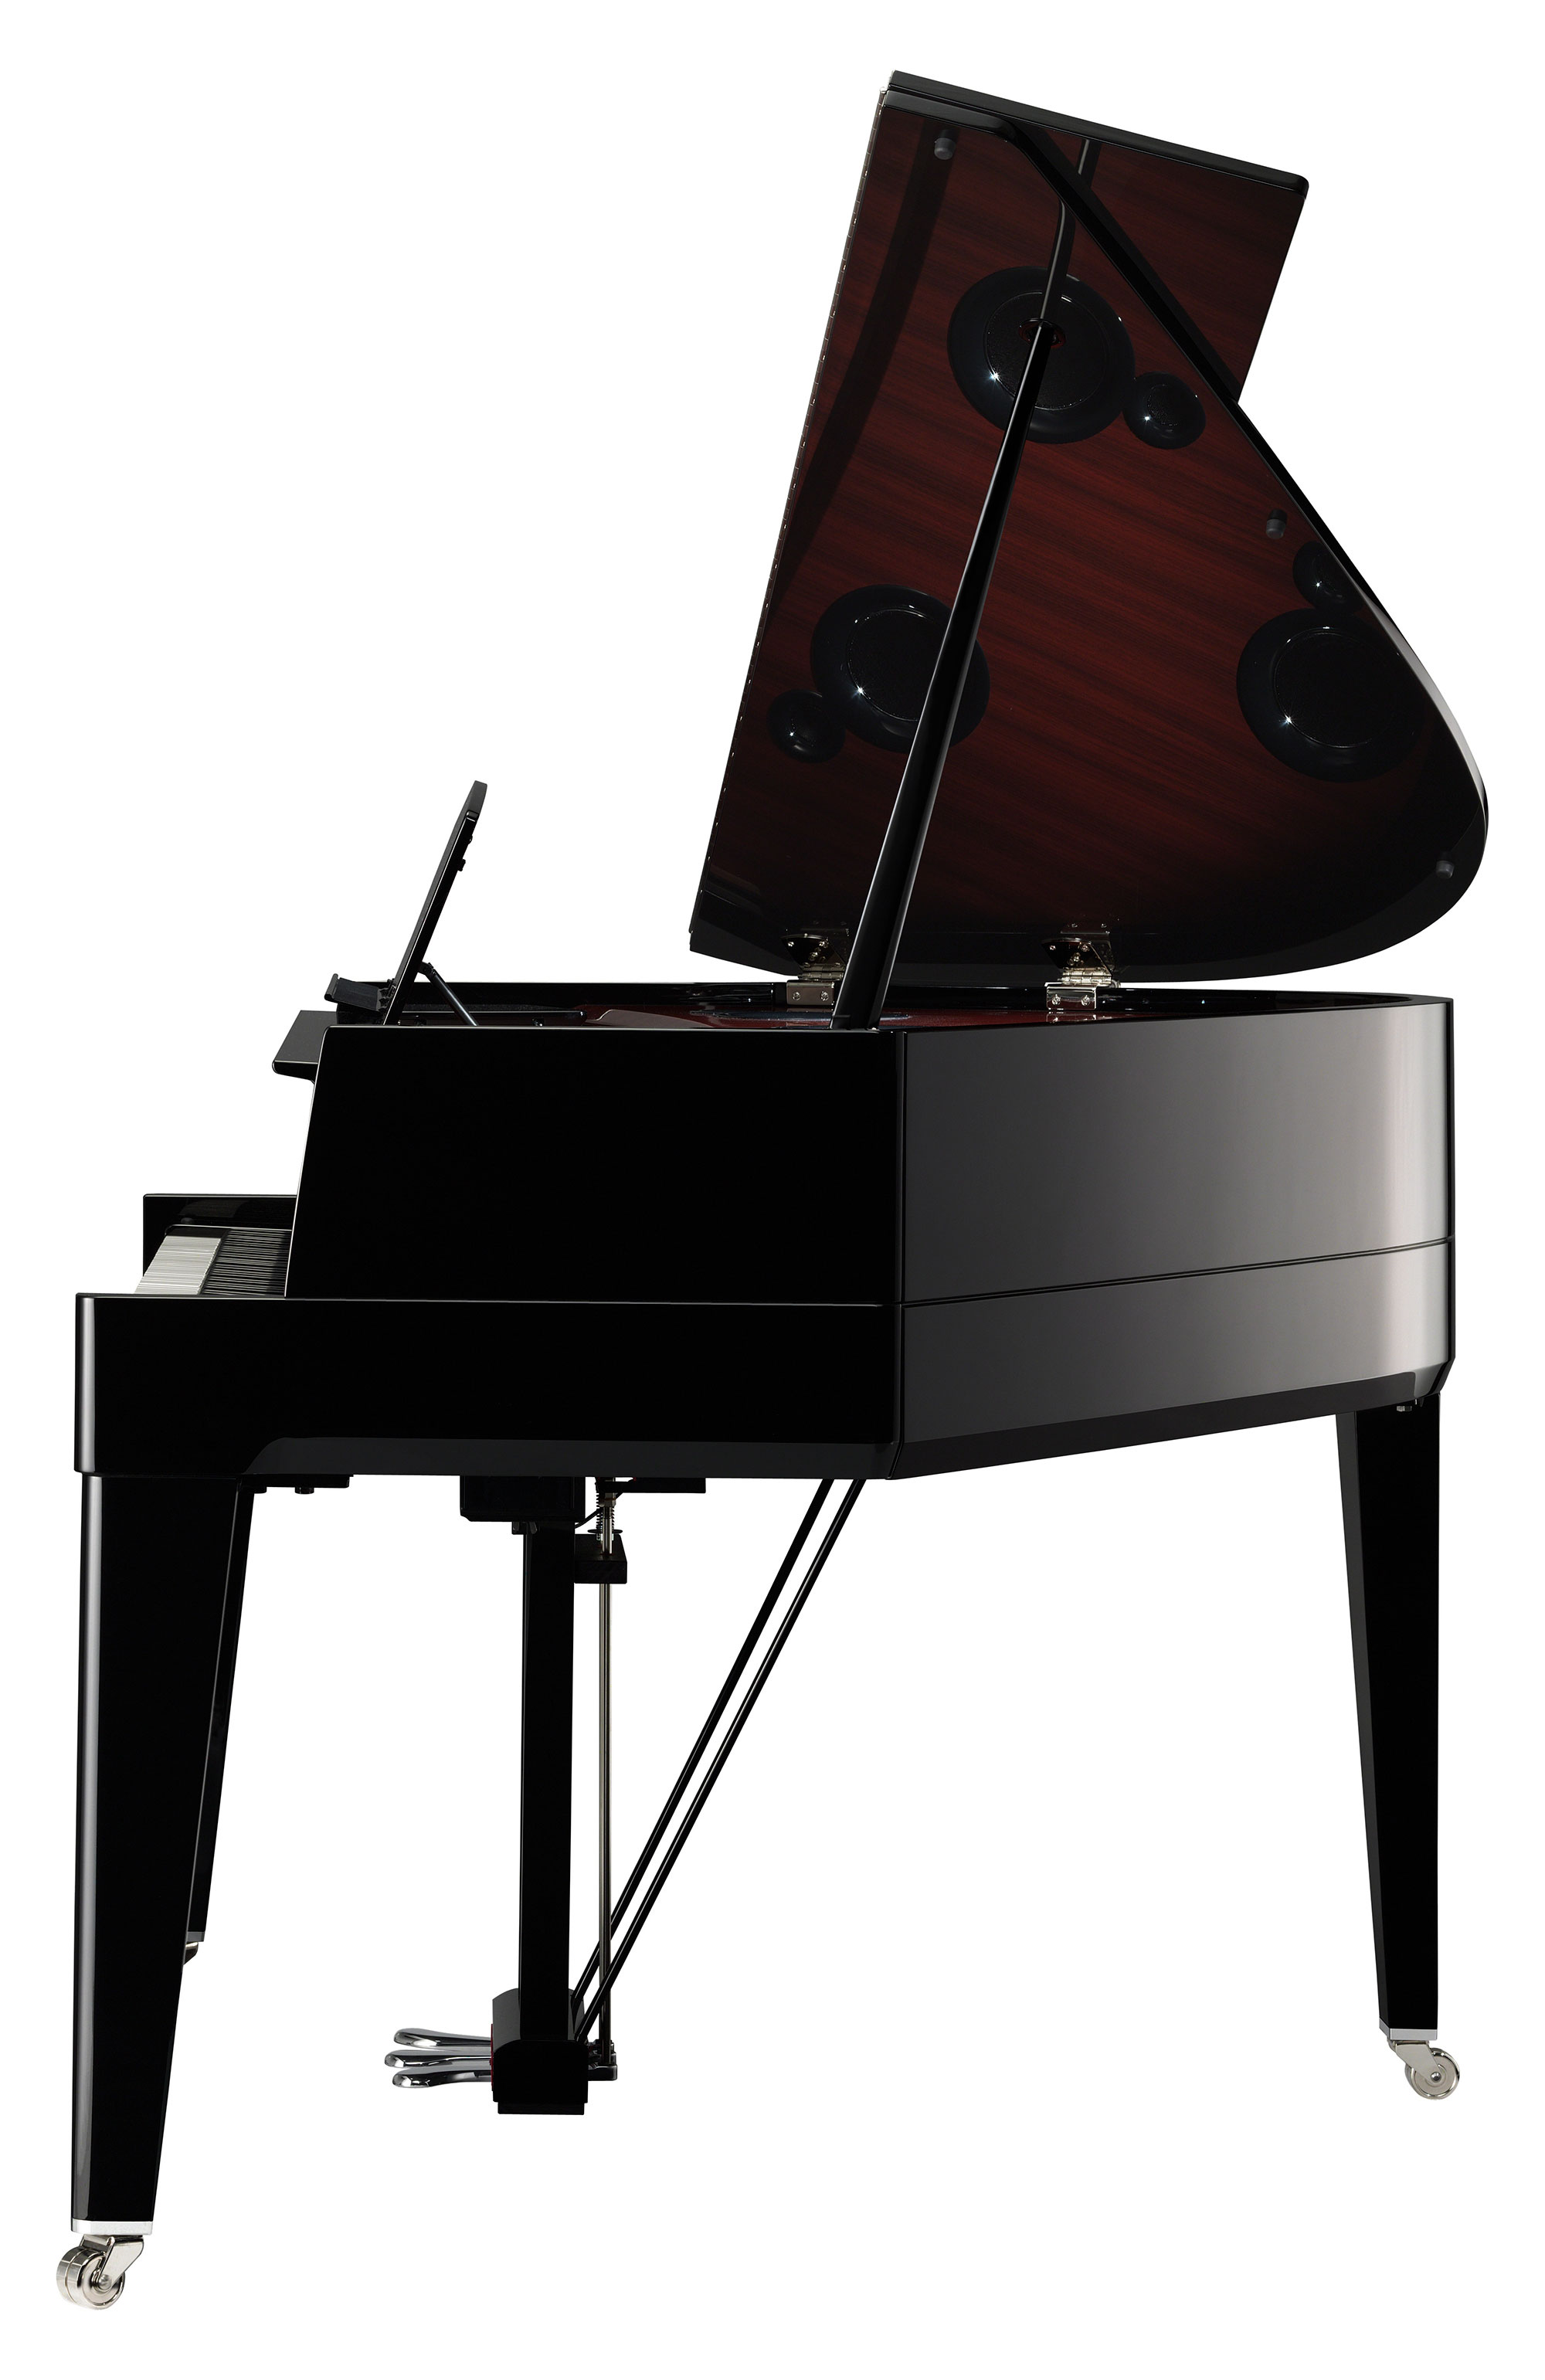 Yamaha N3x - LaquÉ Noir - Digital piano with stand - Variation 6